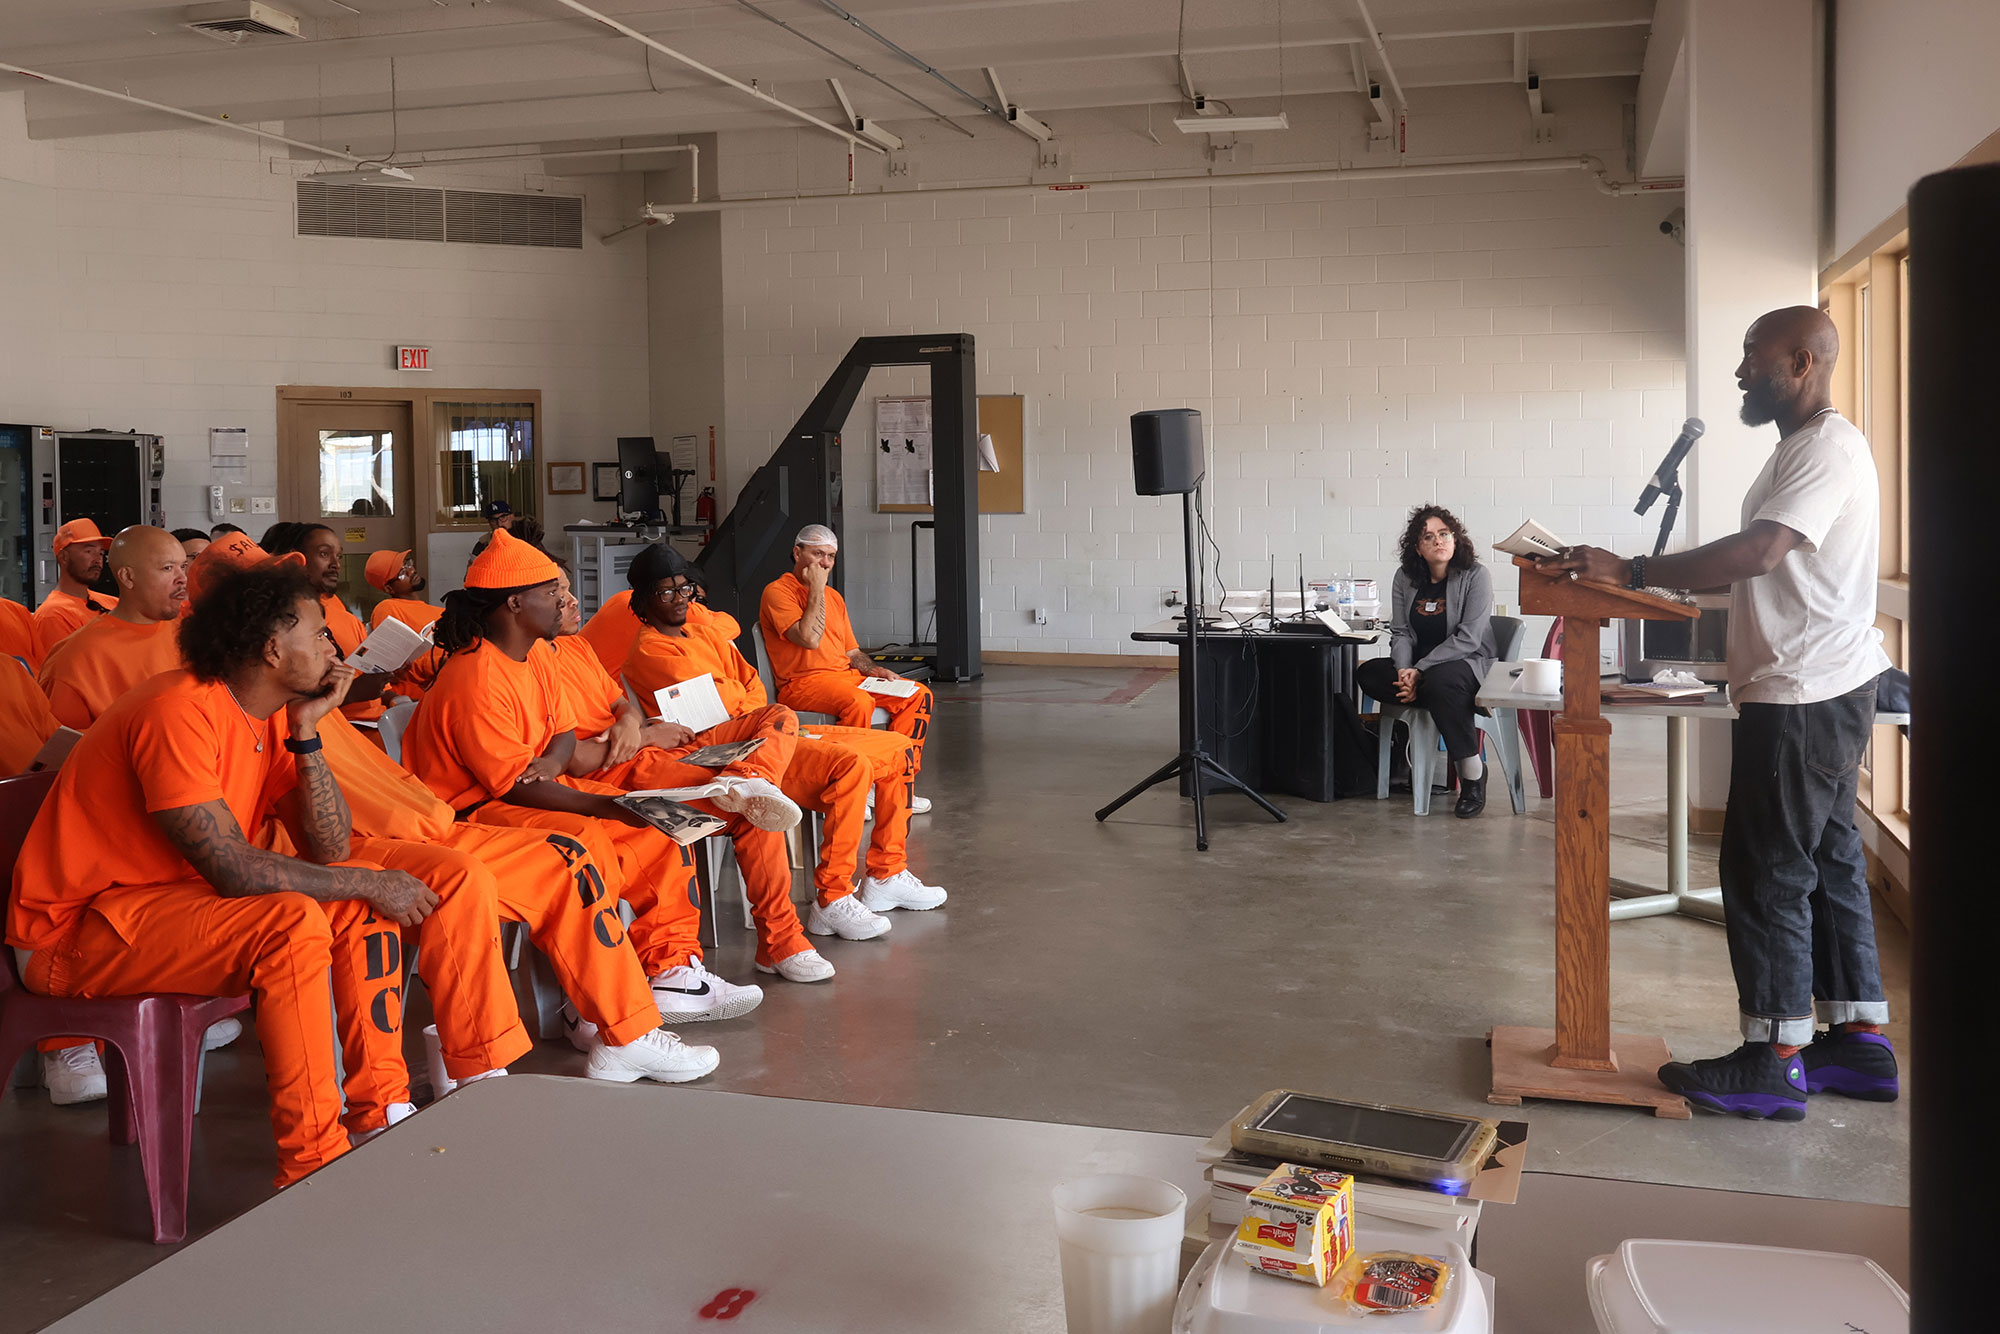 A group of Arizona State Prison Yuma inmates clad in bright orange listening to Dwayne Betts speaking at a wooden podium.